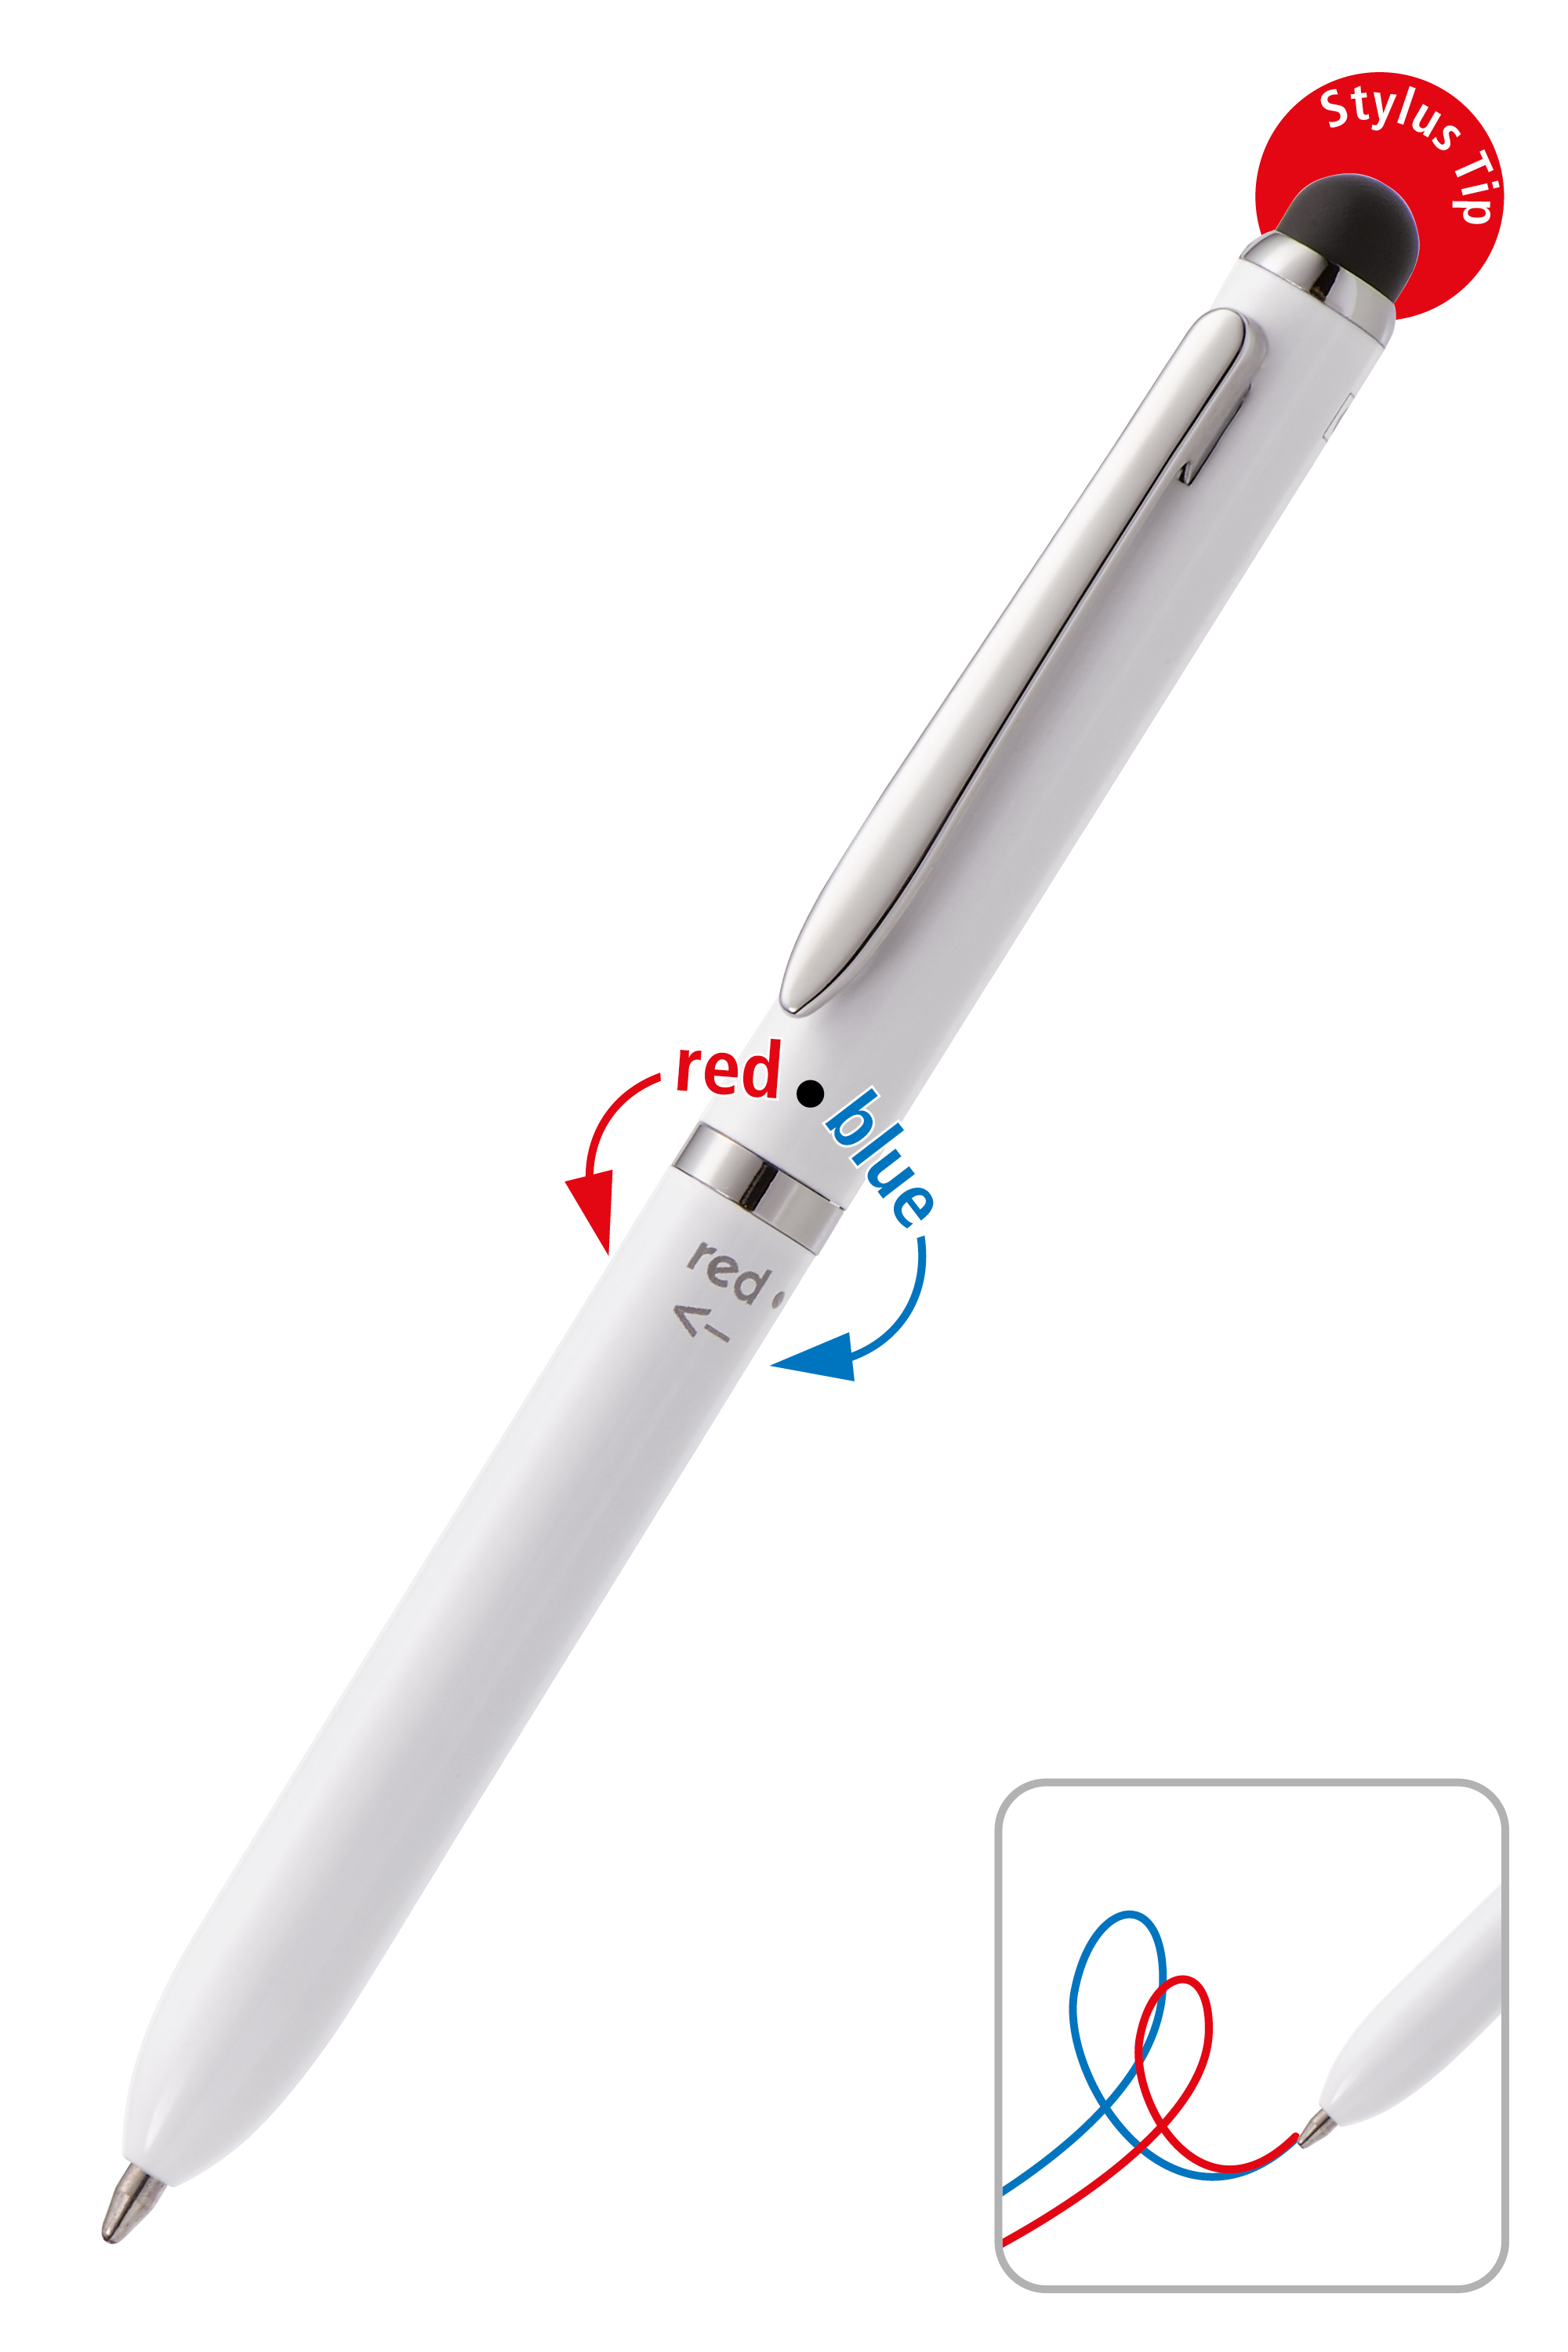 Stylus Tip for 3-in-1 Multi Touch Pen